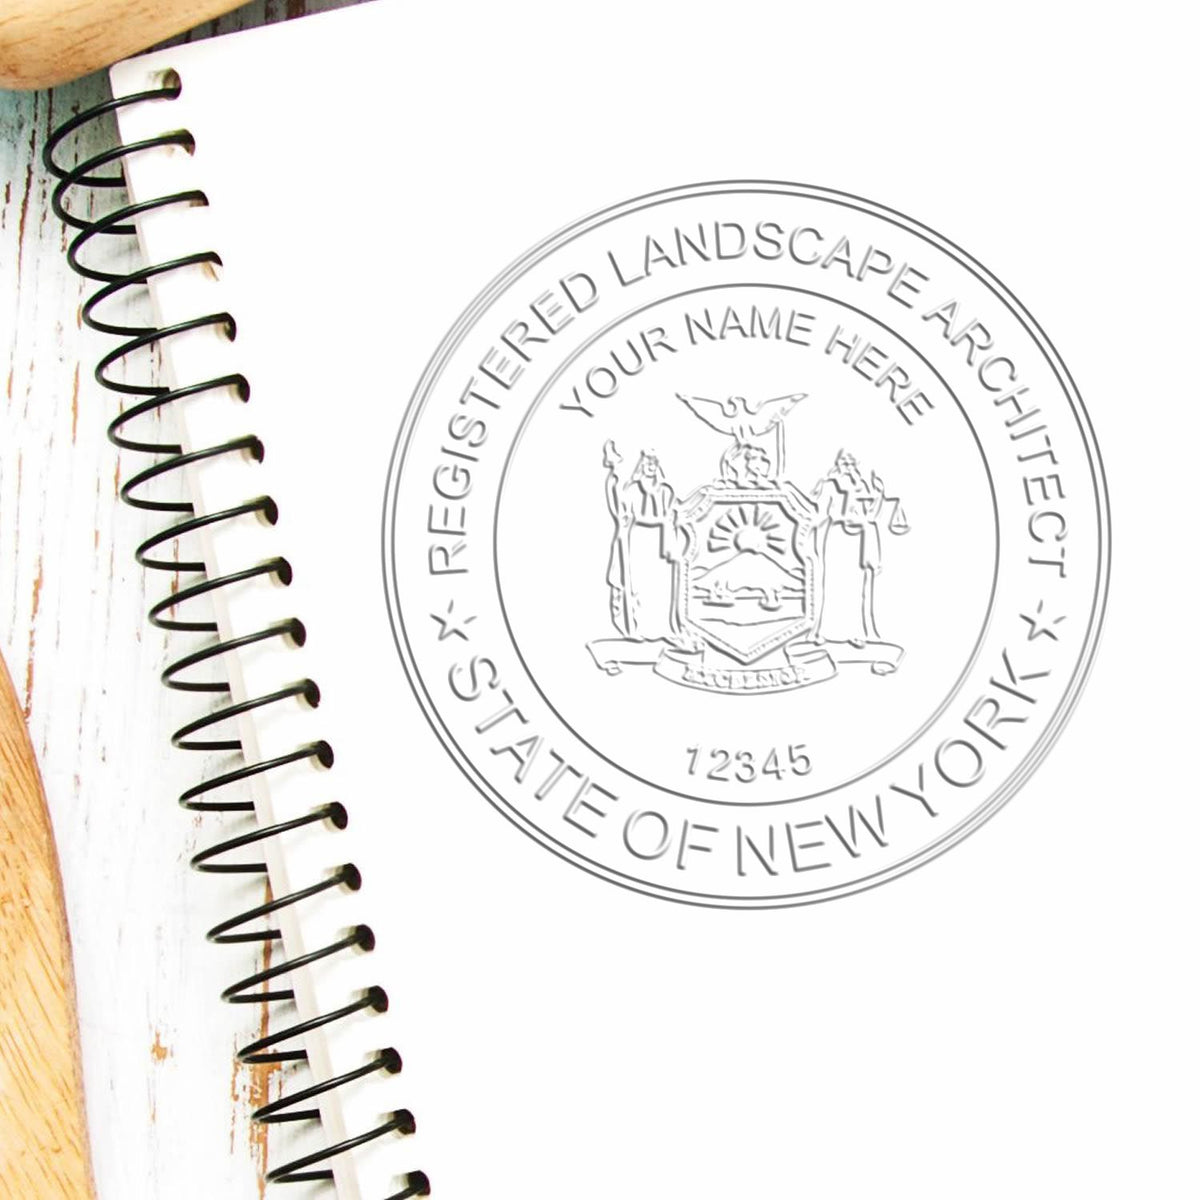 A photograph of the Hybrid New York Landscape Architect Seal stamp impression reveals a vivid, professional image of the on paper.